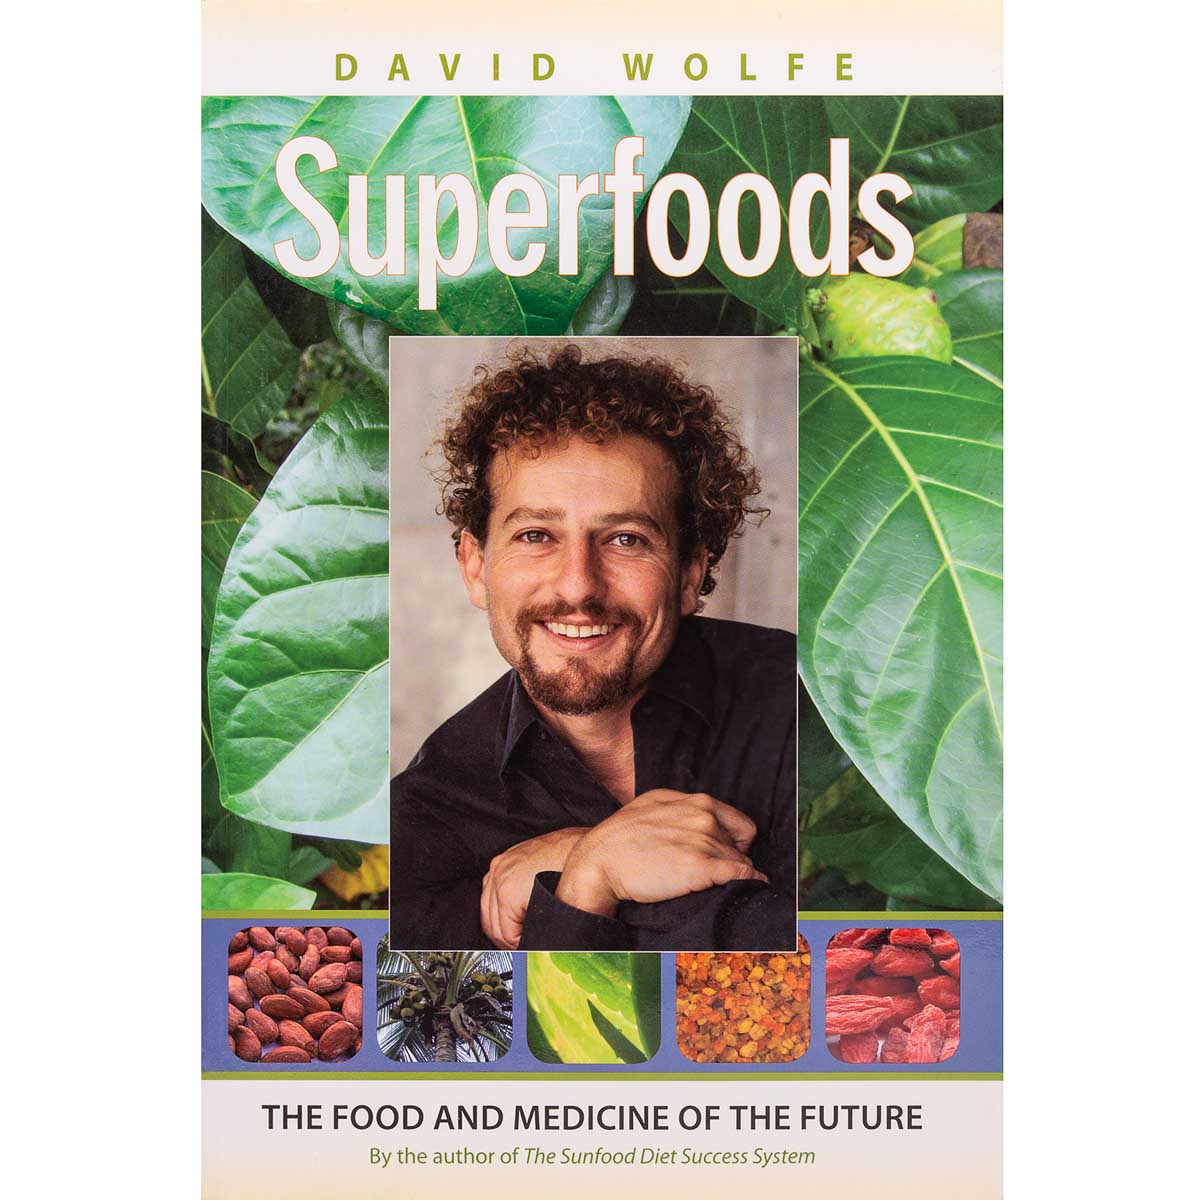 Superfoods | David Wolfe | Raw Living UK | Books | Superfoods: The Food &amp; Medicine of the Future by David Wolfe. Superfoods are vibrant, nutritionally dense foods offering tremendous dietary &amp; healing potential.